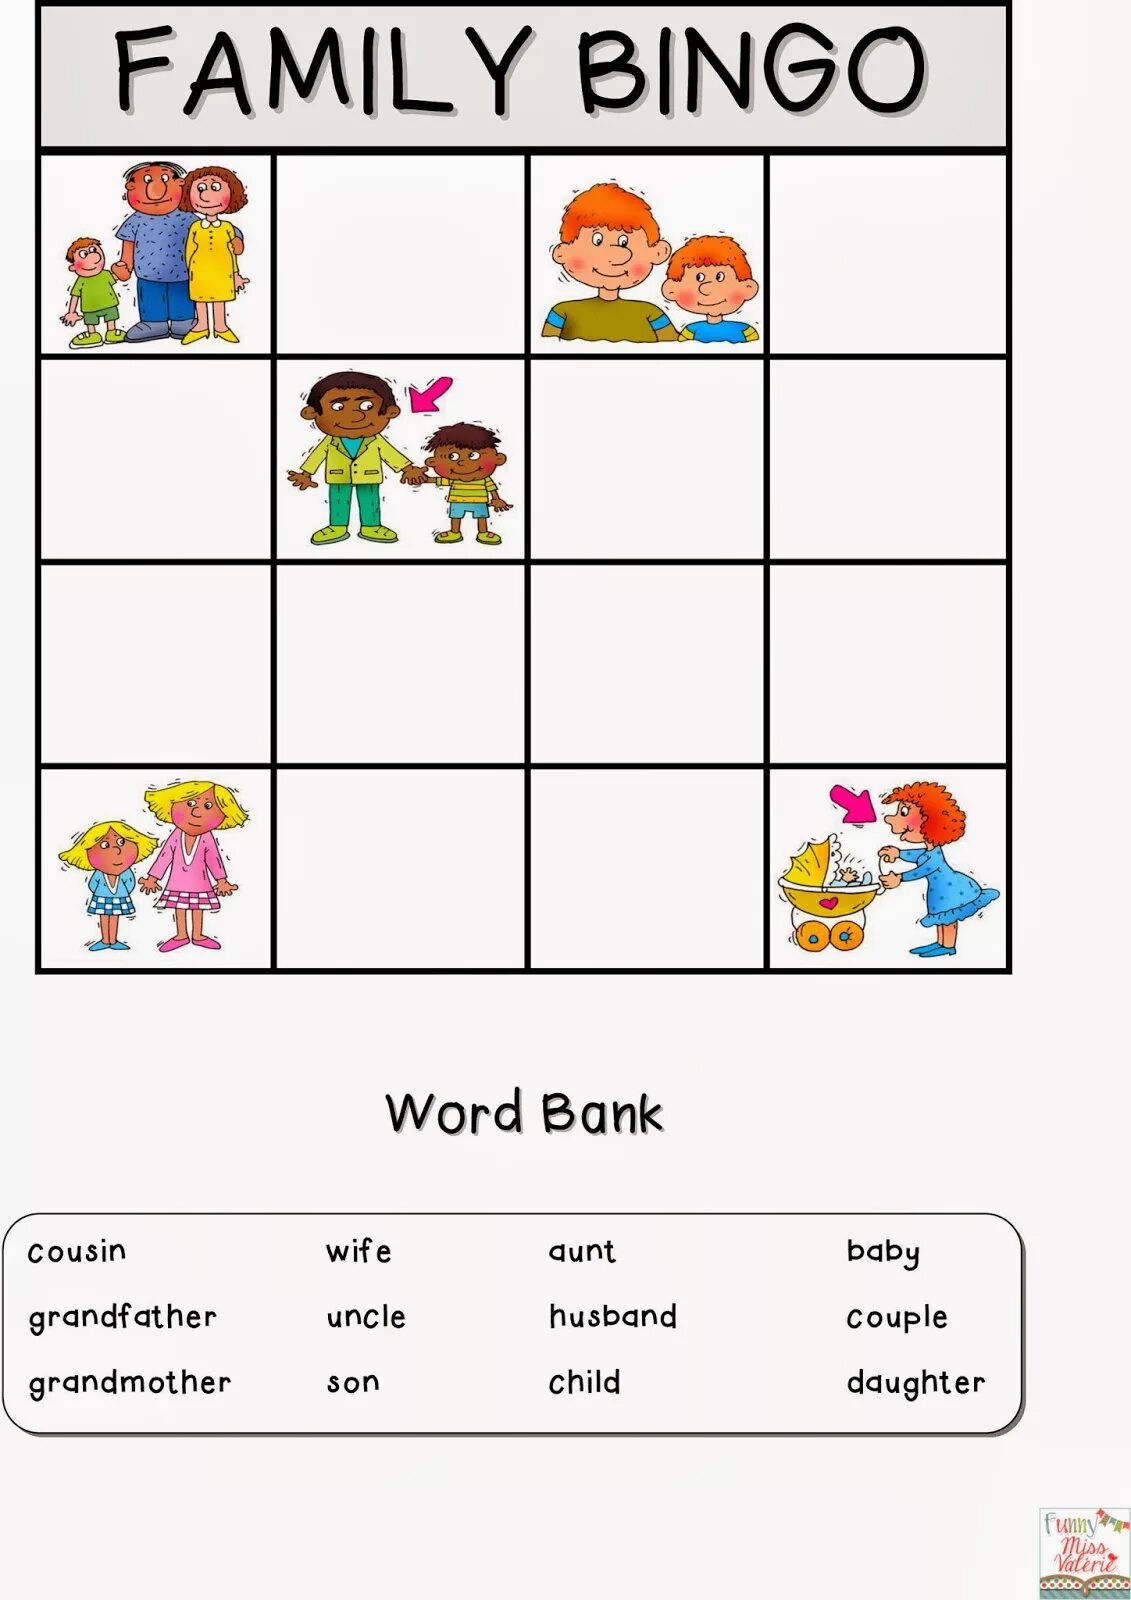 My family games. Family Worksheets for Kids 2 класс. My Family задания для дошкольников. Worksheets Family 1 класс. My Family 2 класс английский язык Worksheets.